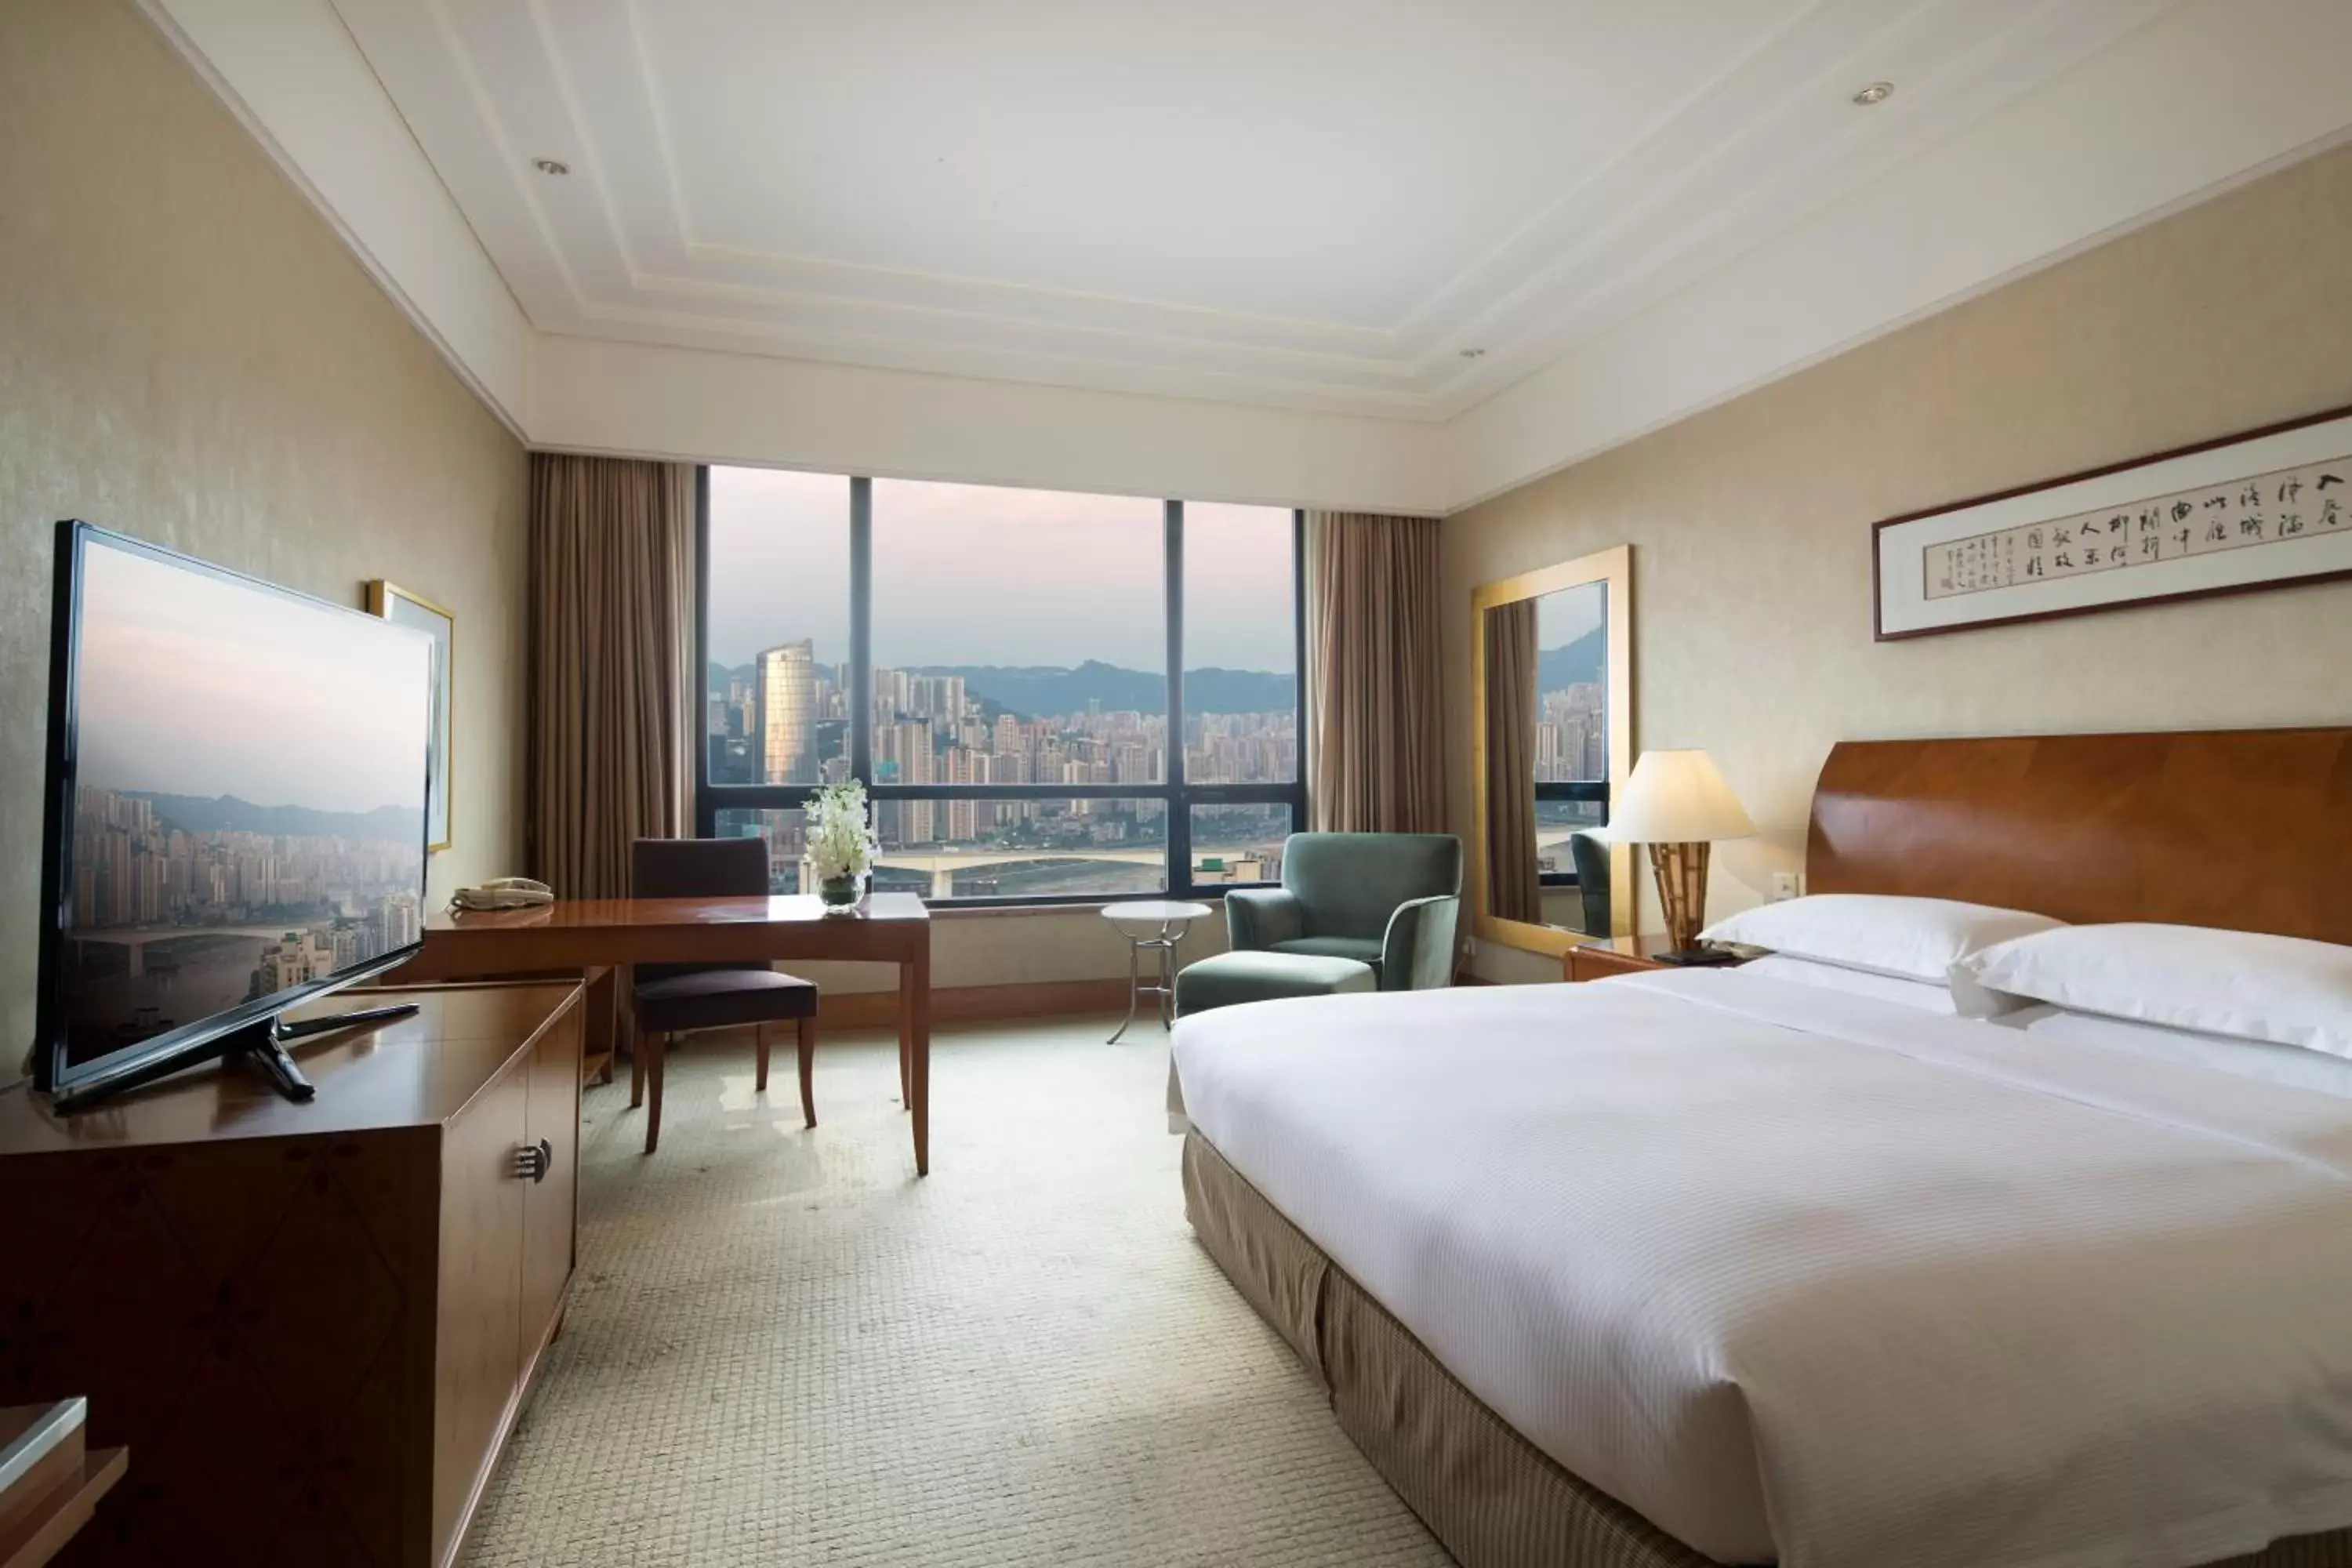 View (from property/room) in Hilton Chongqing